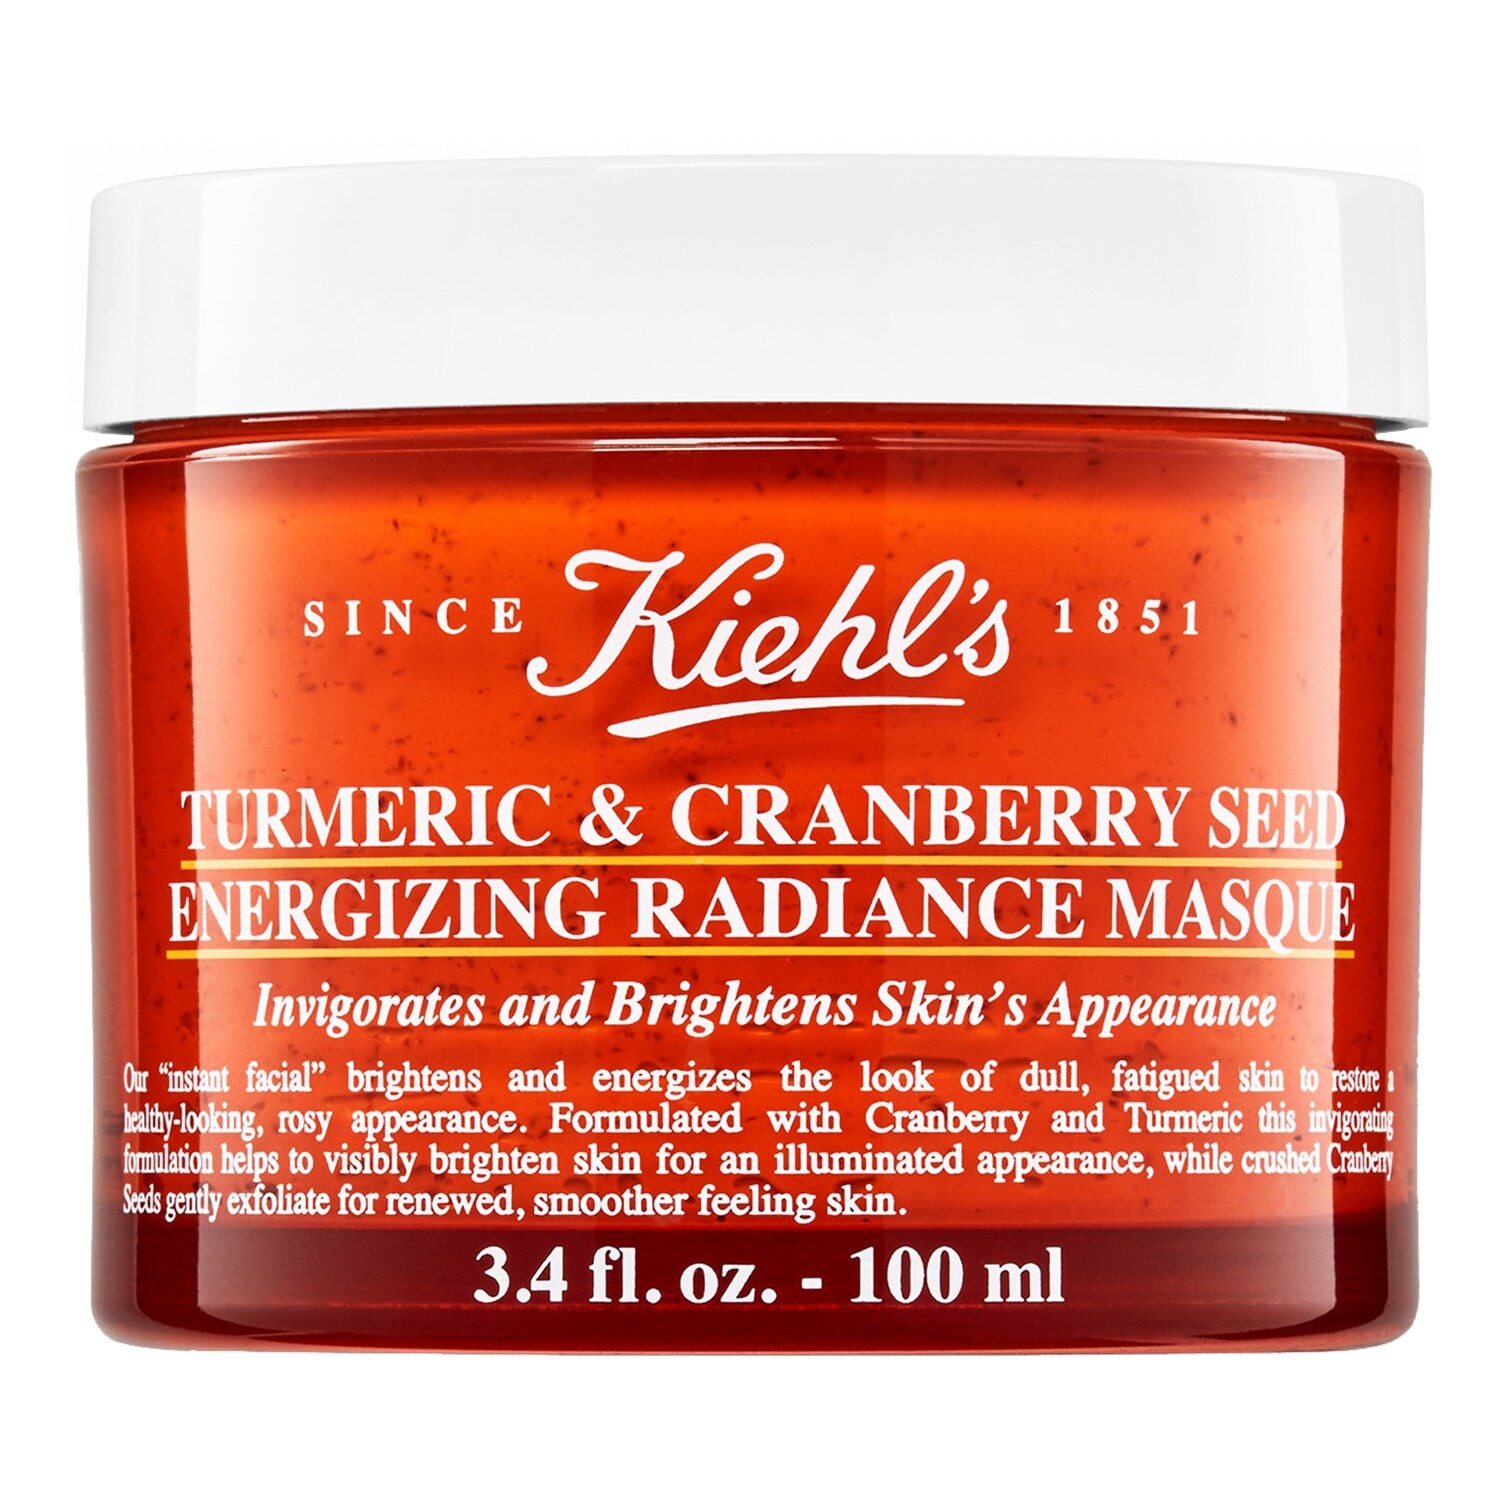 KIEHL'S Turmeric & Cranberry Seed Energizing Radiance Face Mask